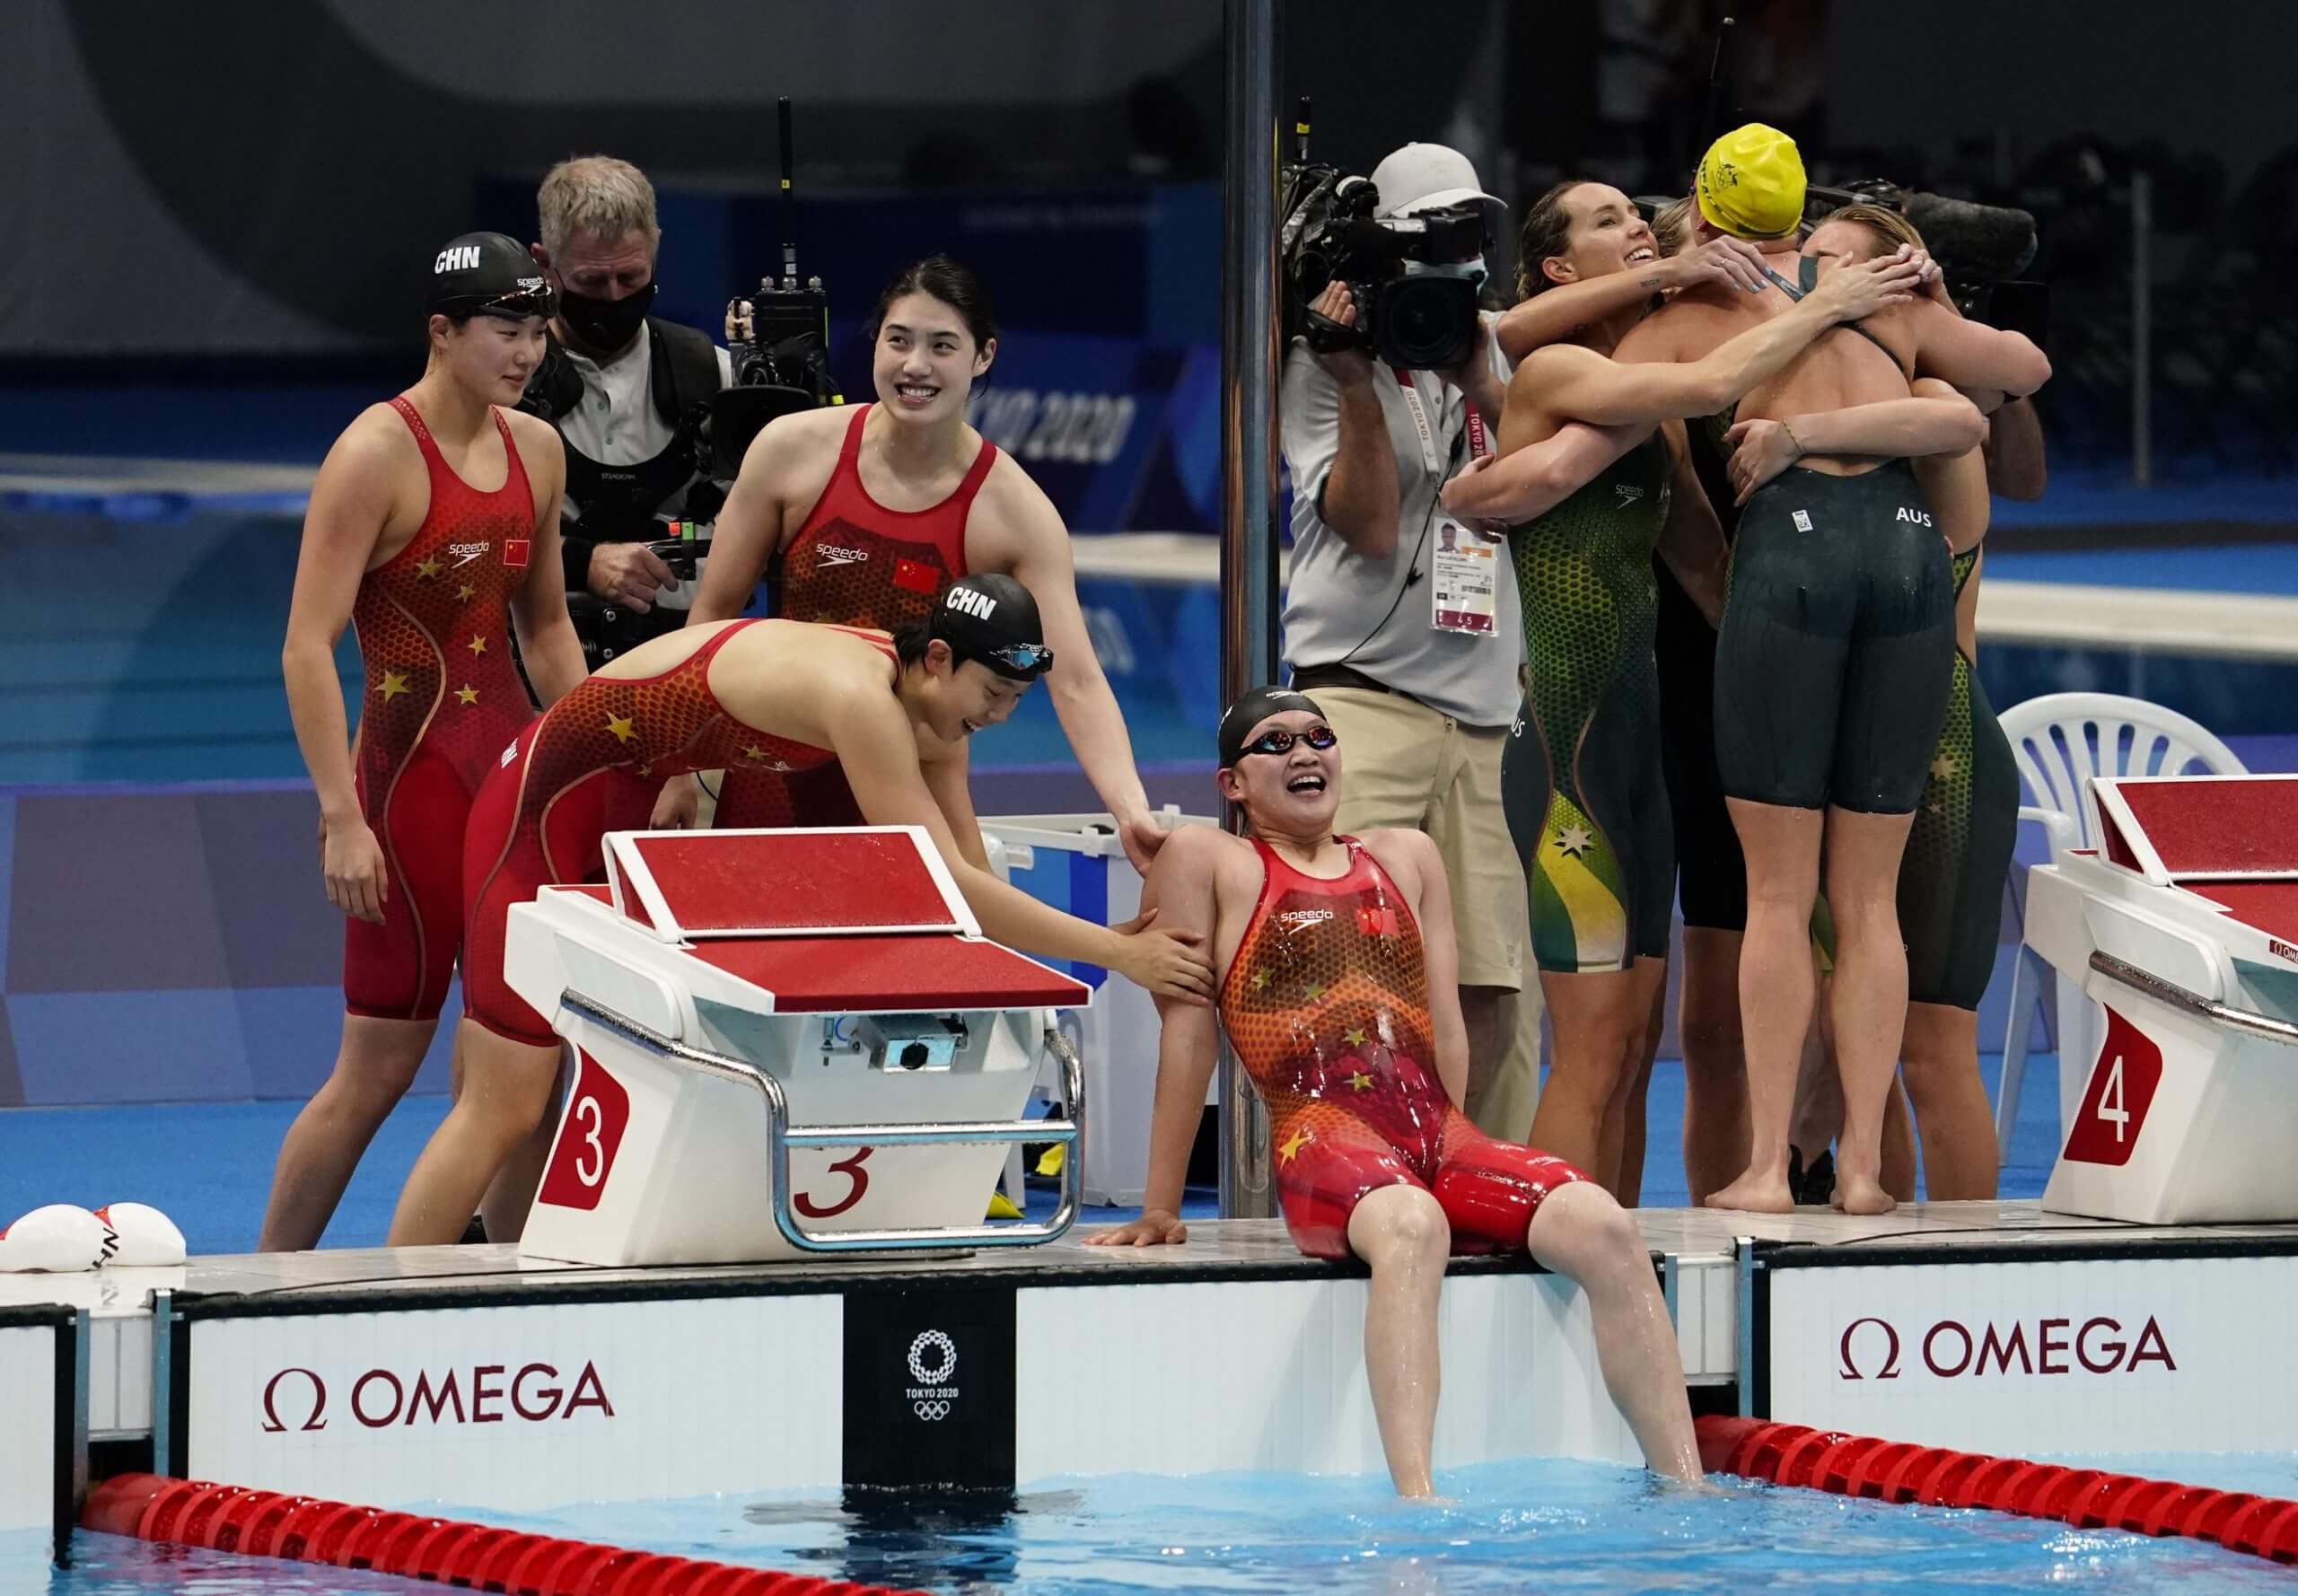 Jul 29, 2021; Tokyo, Japan; China relay team celebrates their victory in the women's 4x200m freestyle relay final during the Tokyo 2020 Olympic Summer Games at Tokyo Aquatics Centre. Mandatory Credit: Rob Schumacher-USA TODAY Sports